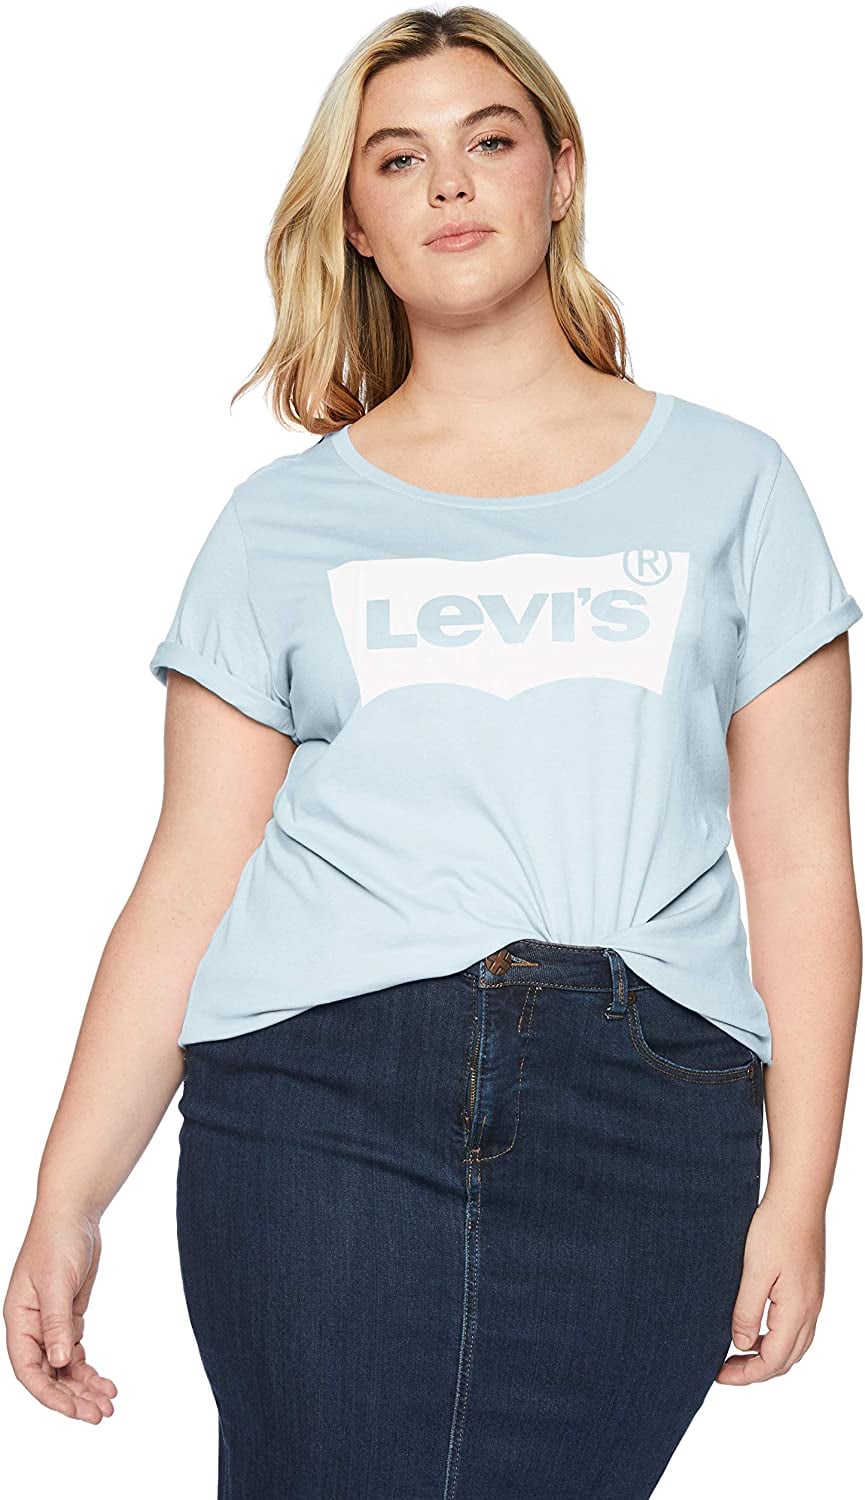 Levi's Women's Perfect Tee  Shirt | 27 T-Shirts on Amazon That Can Go  With Absolutely Anything | POPSUGAR Fashion Photo 24